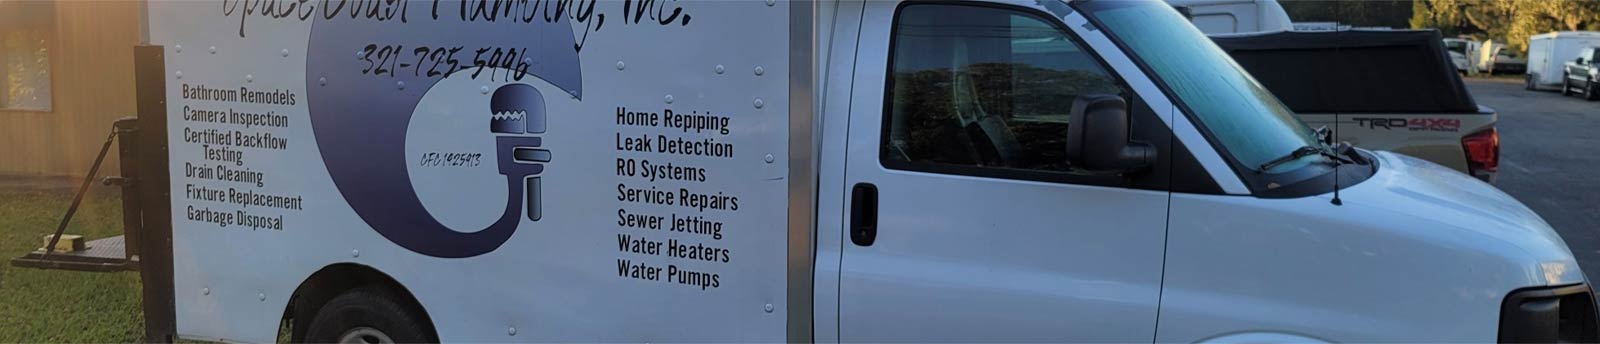 Keeping Your Septic Tank Working Requires Some Maintenance